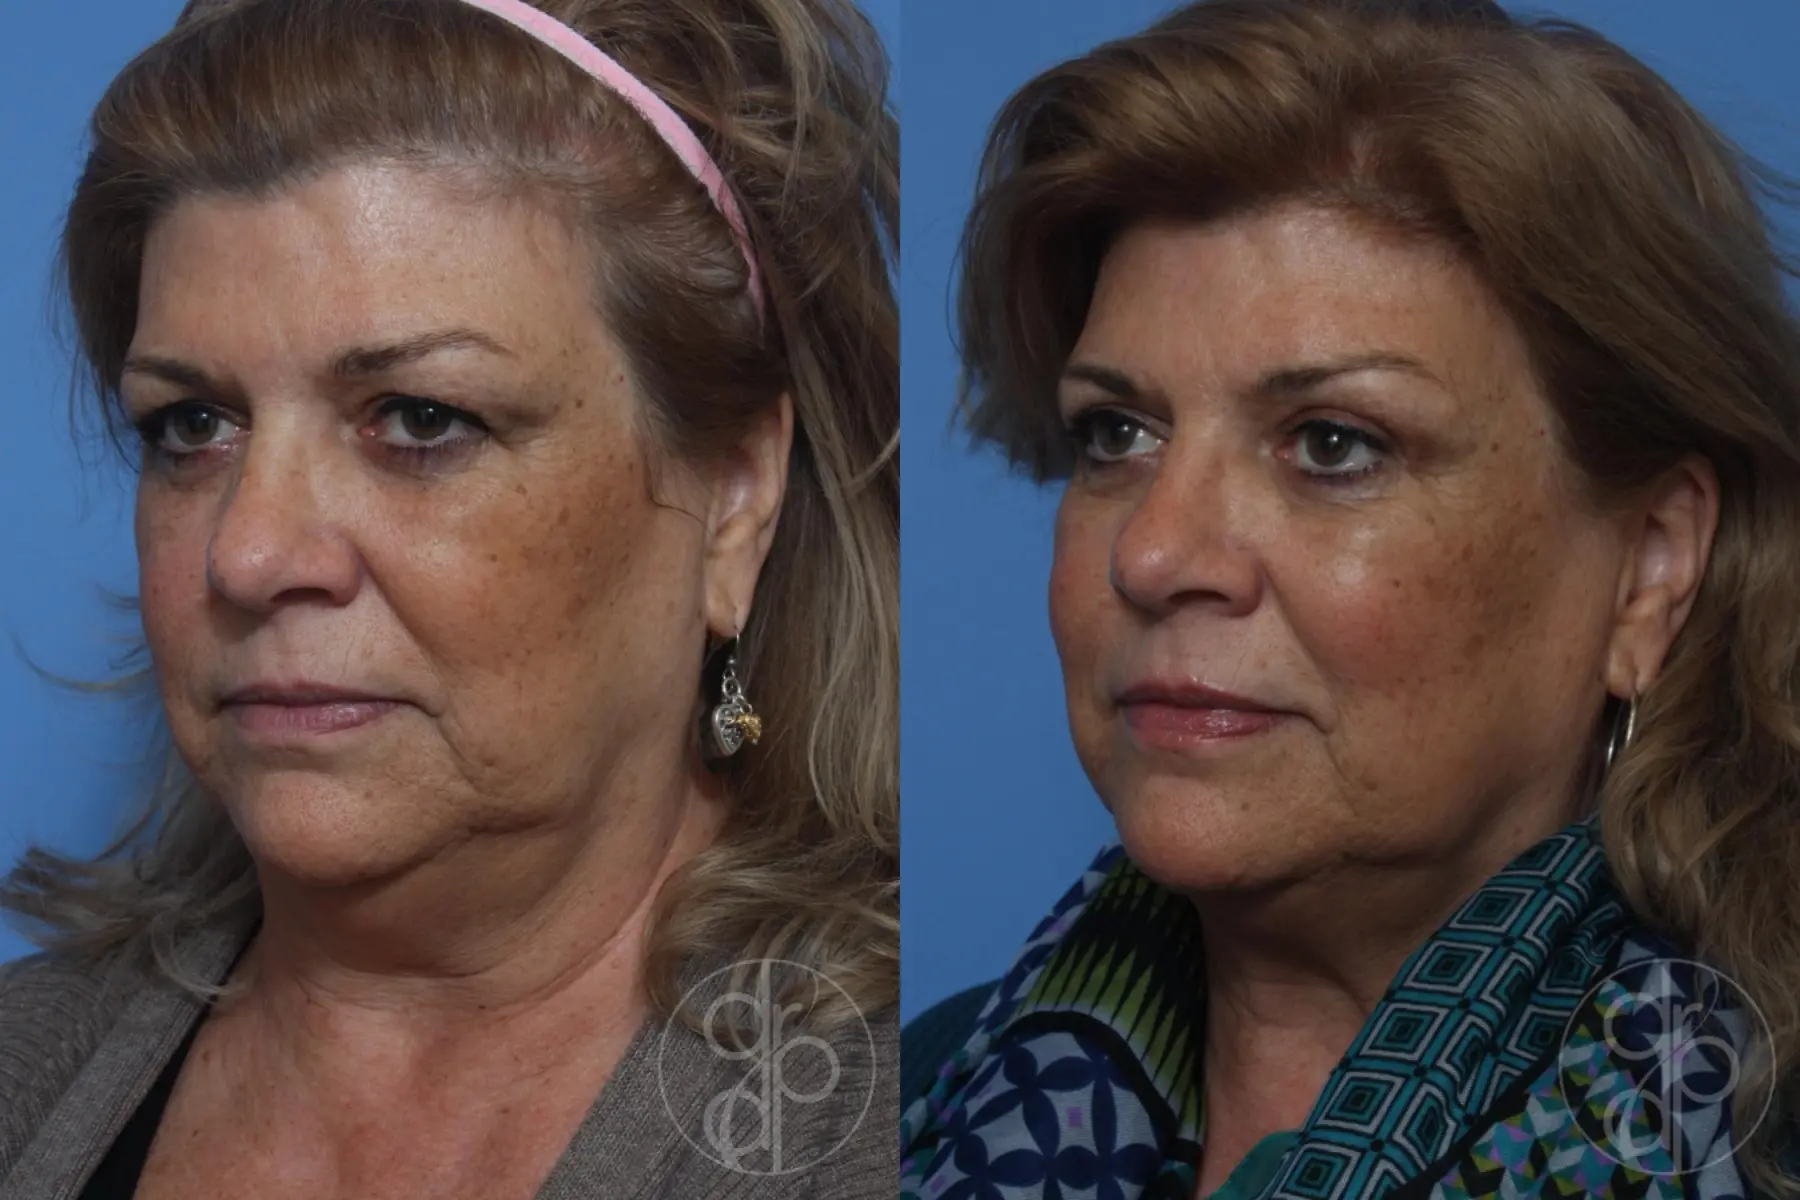 patient 10525 blepharoplasty before and after result - Before and After 3